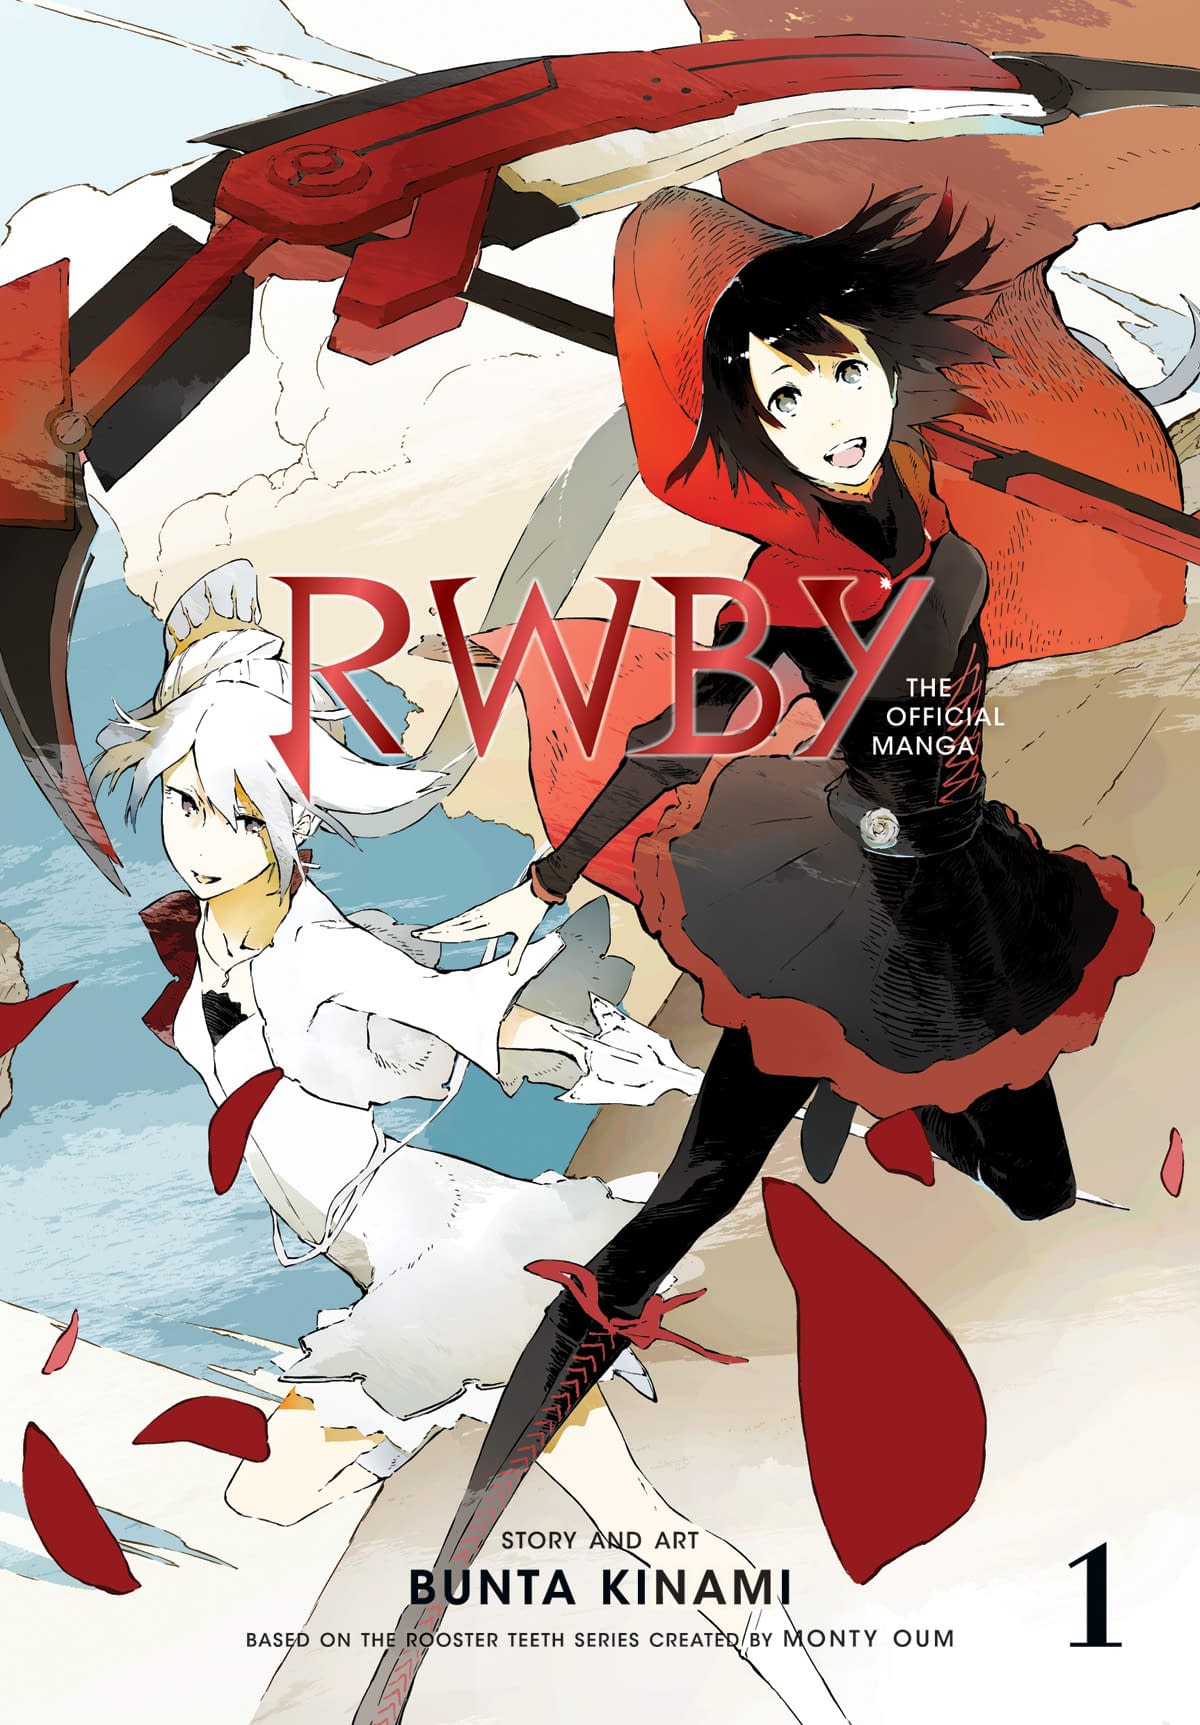 RWBY: The Official Manga From US Anime Series Coming From Viz Media